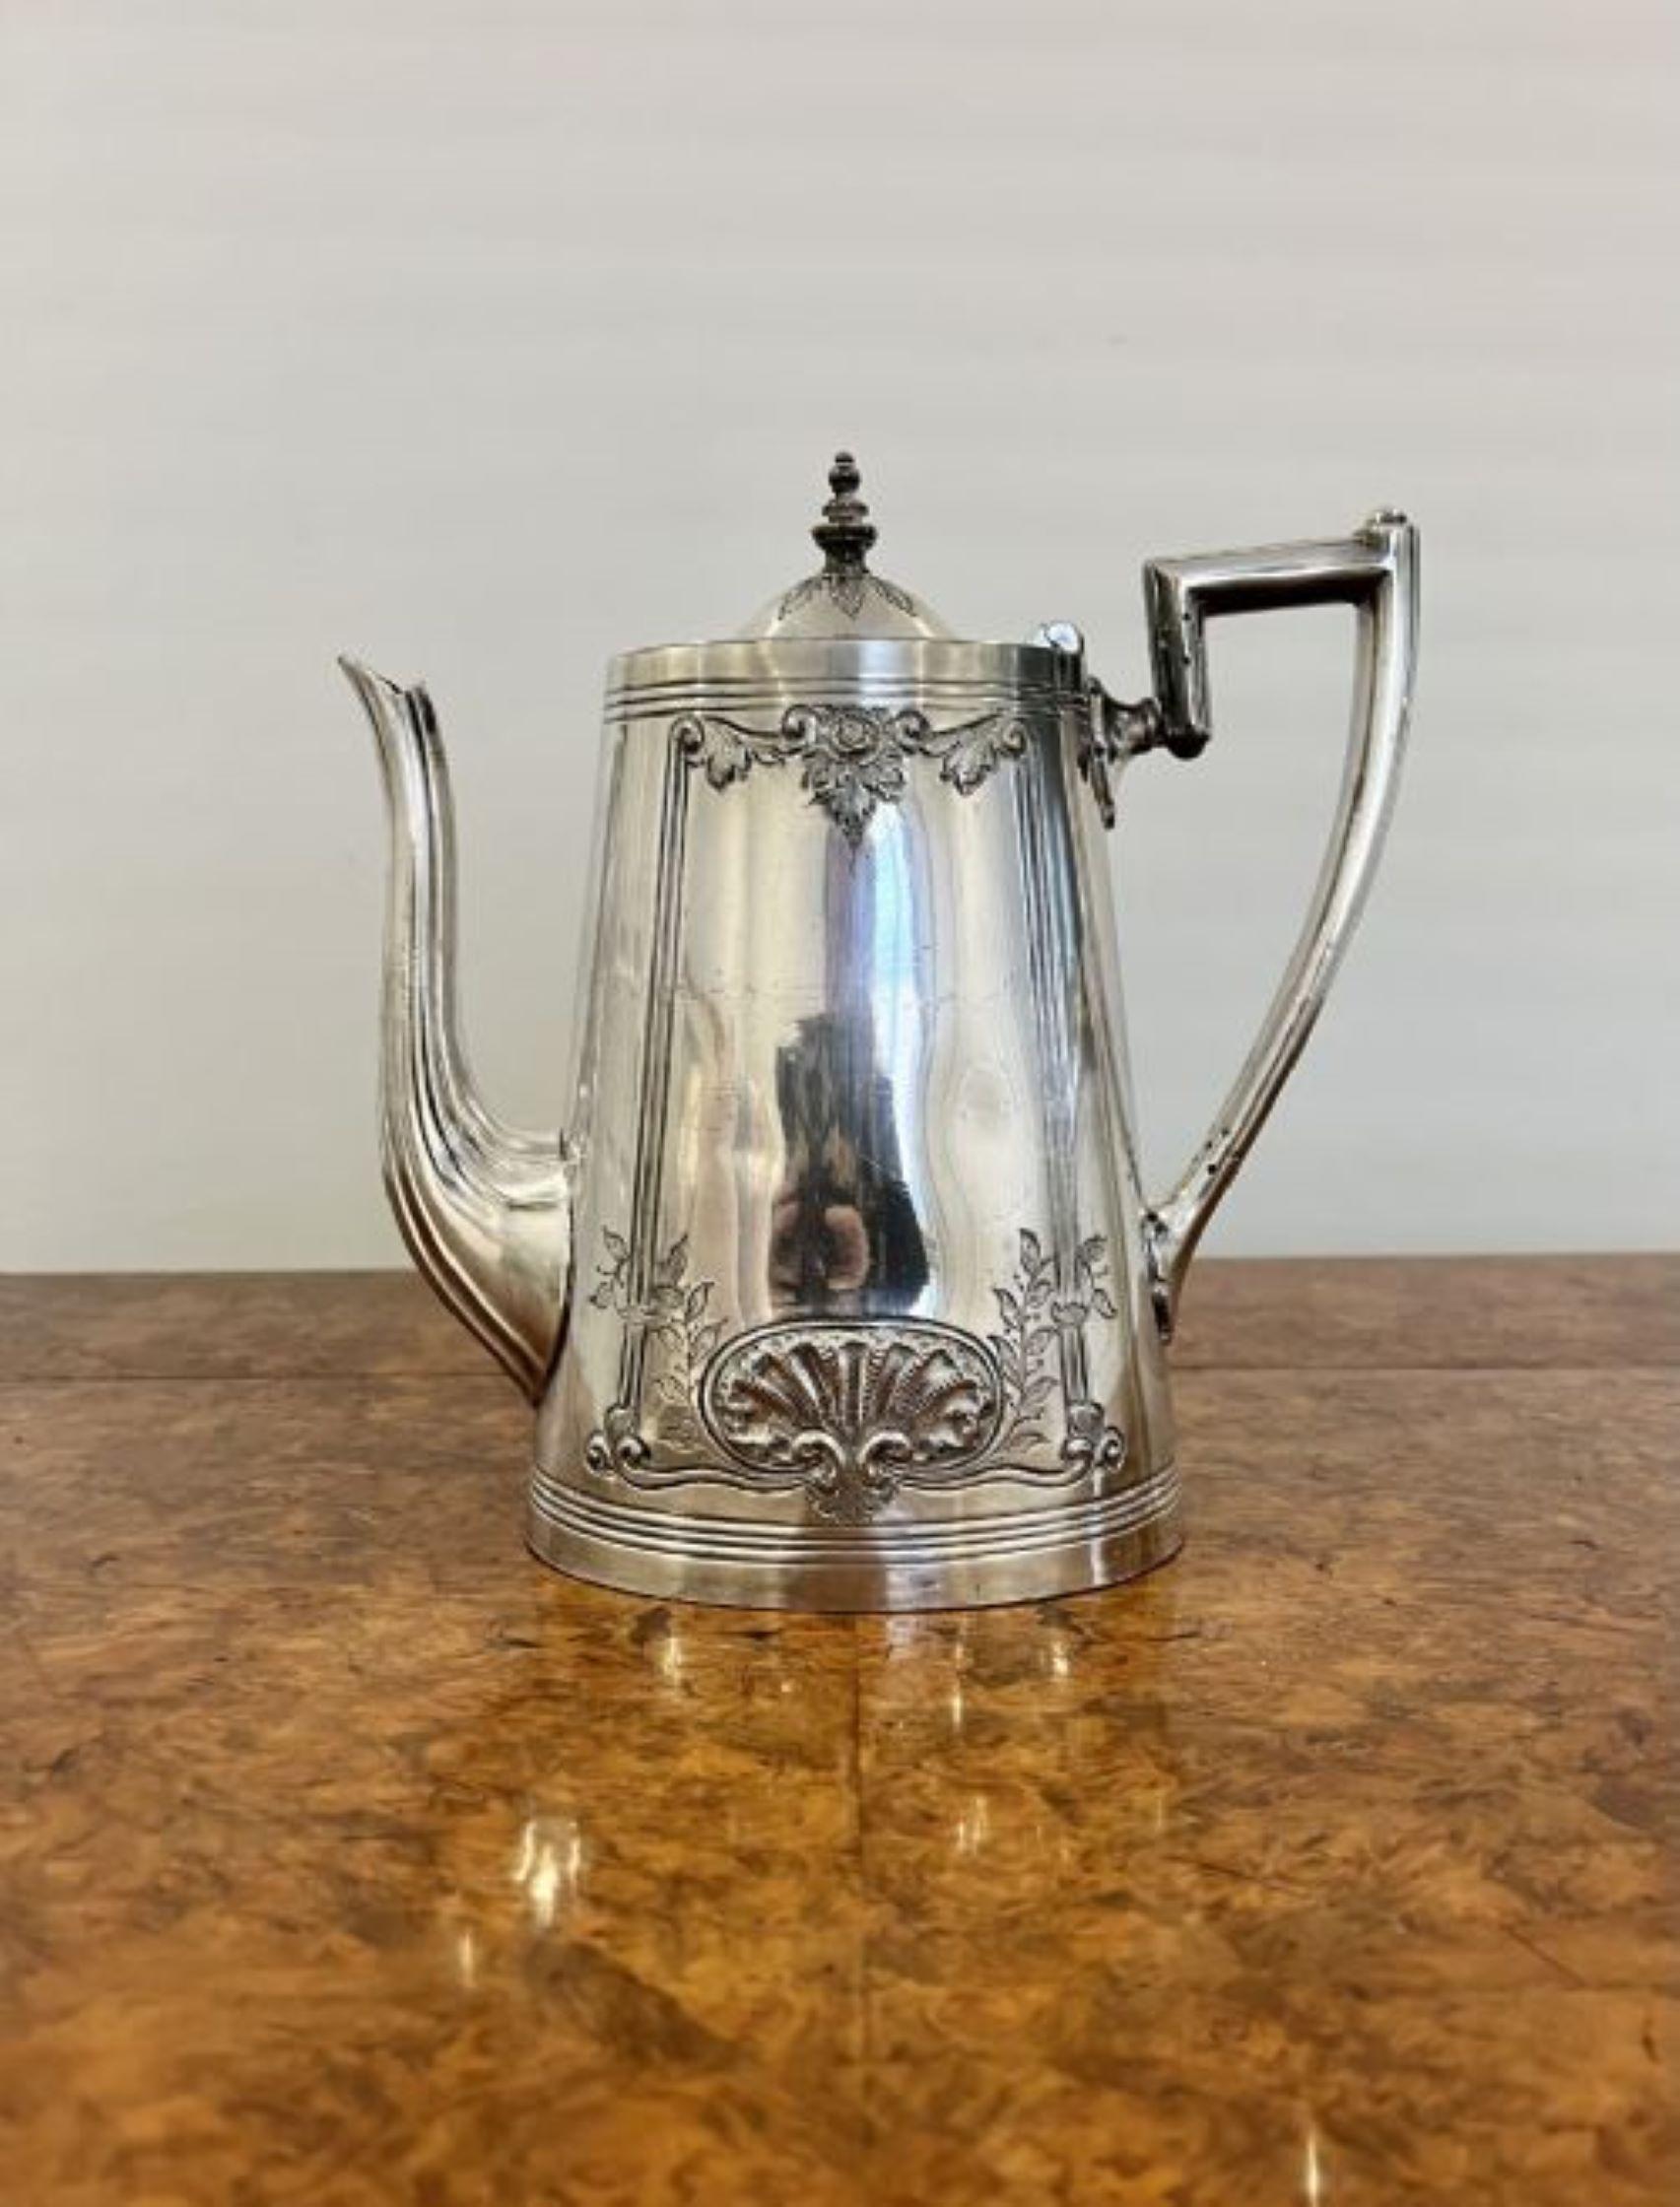 Antique Edwardian ornate silver plated three piece tea set consisting of a silver plated ornate tea pot, coffee pot and sugar bowl with lovely ornate detail  